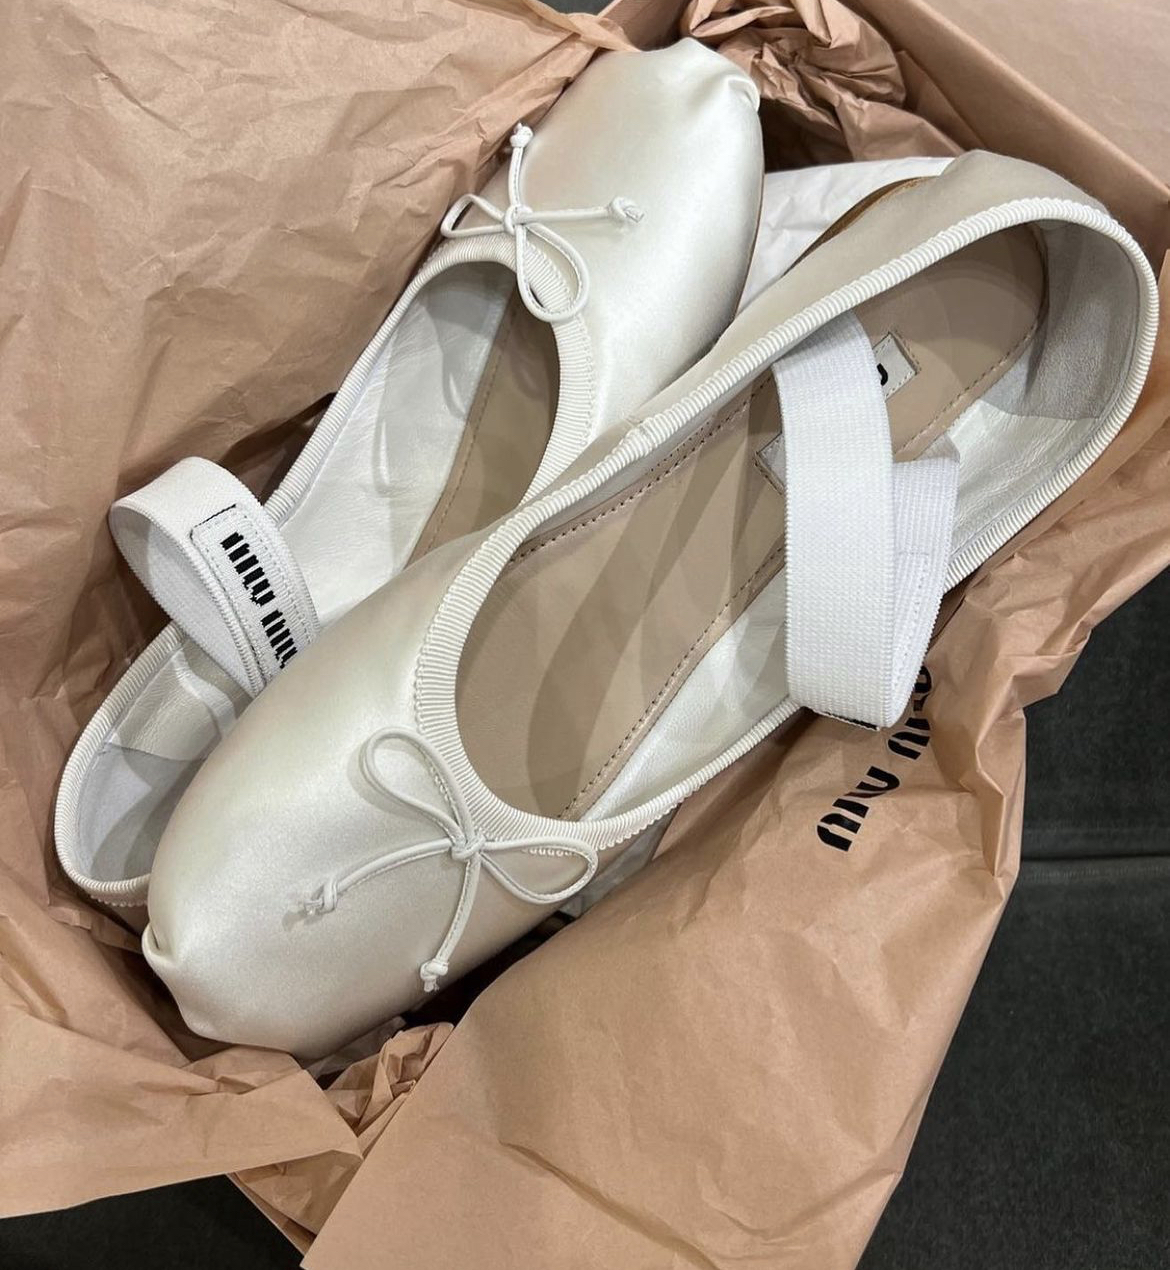 The Importance of Skin-Tone Tights and Shoes in Dance - Principal Creative  & Performing Arts